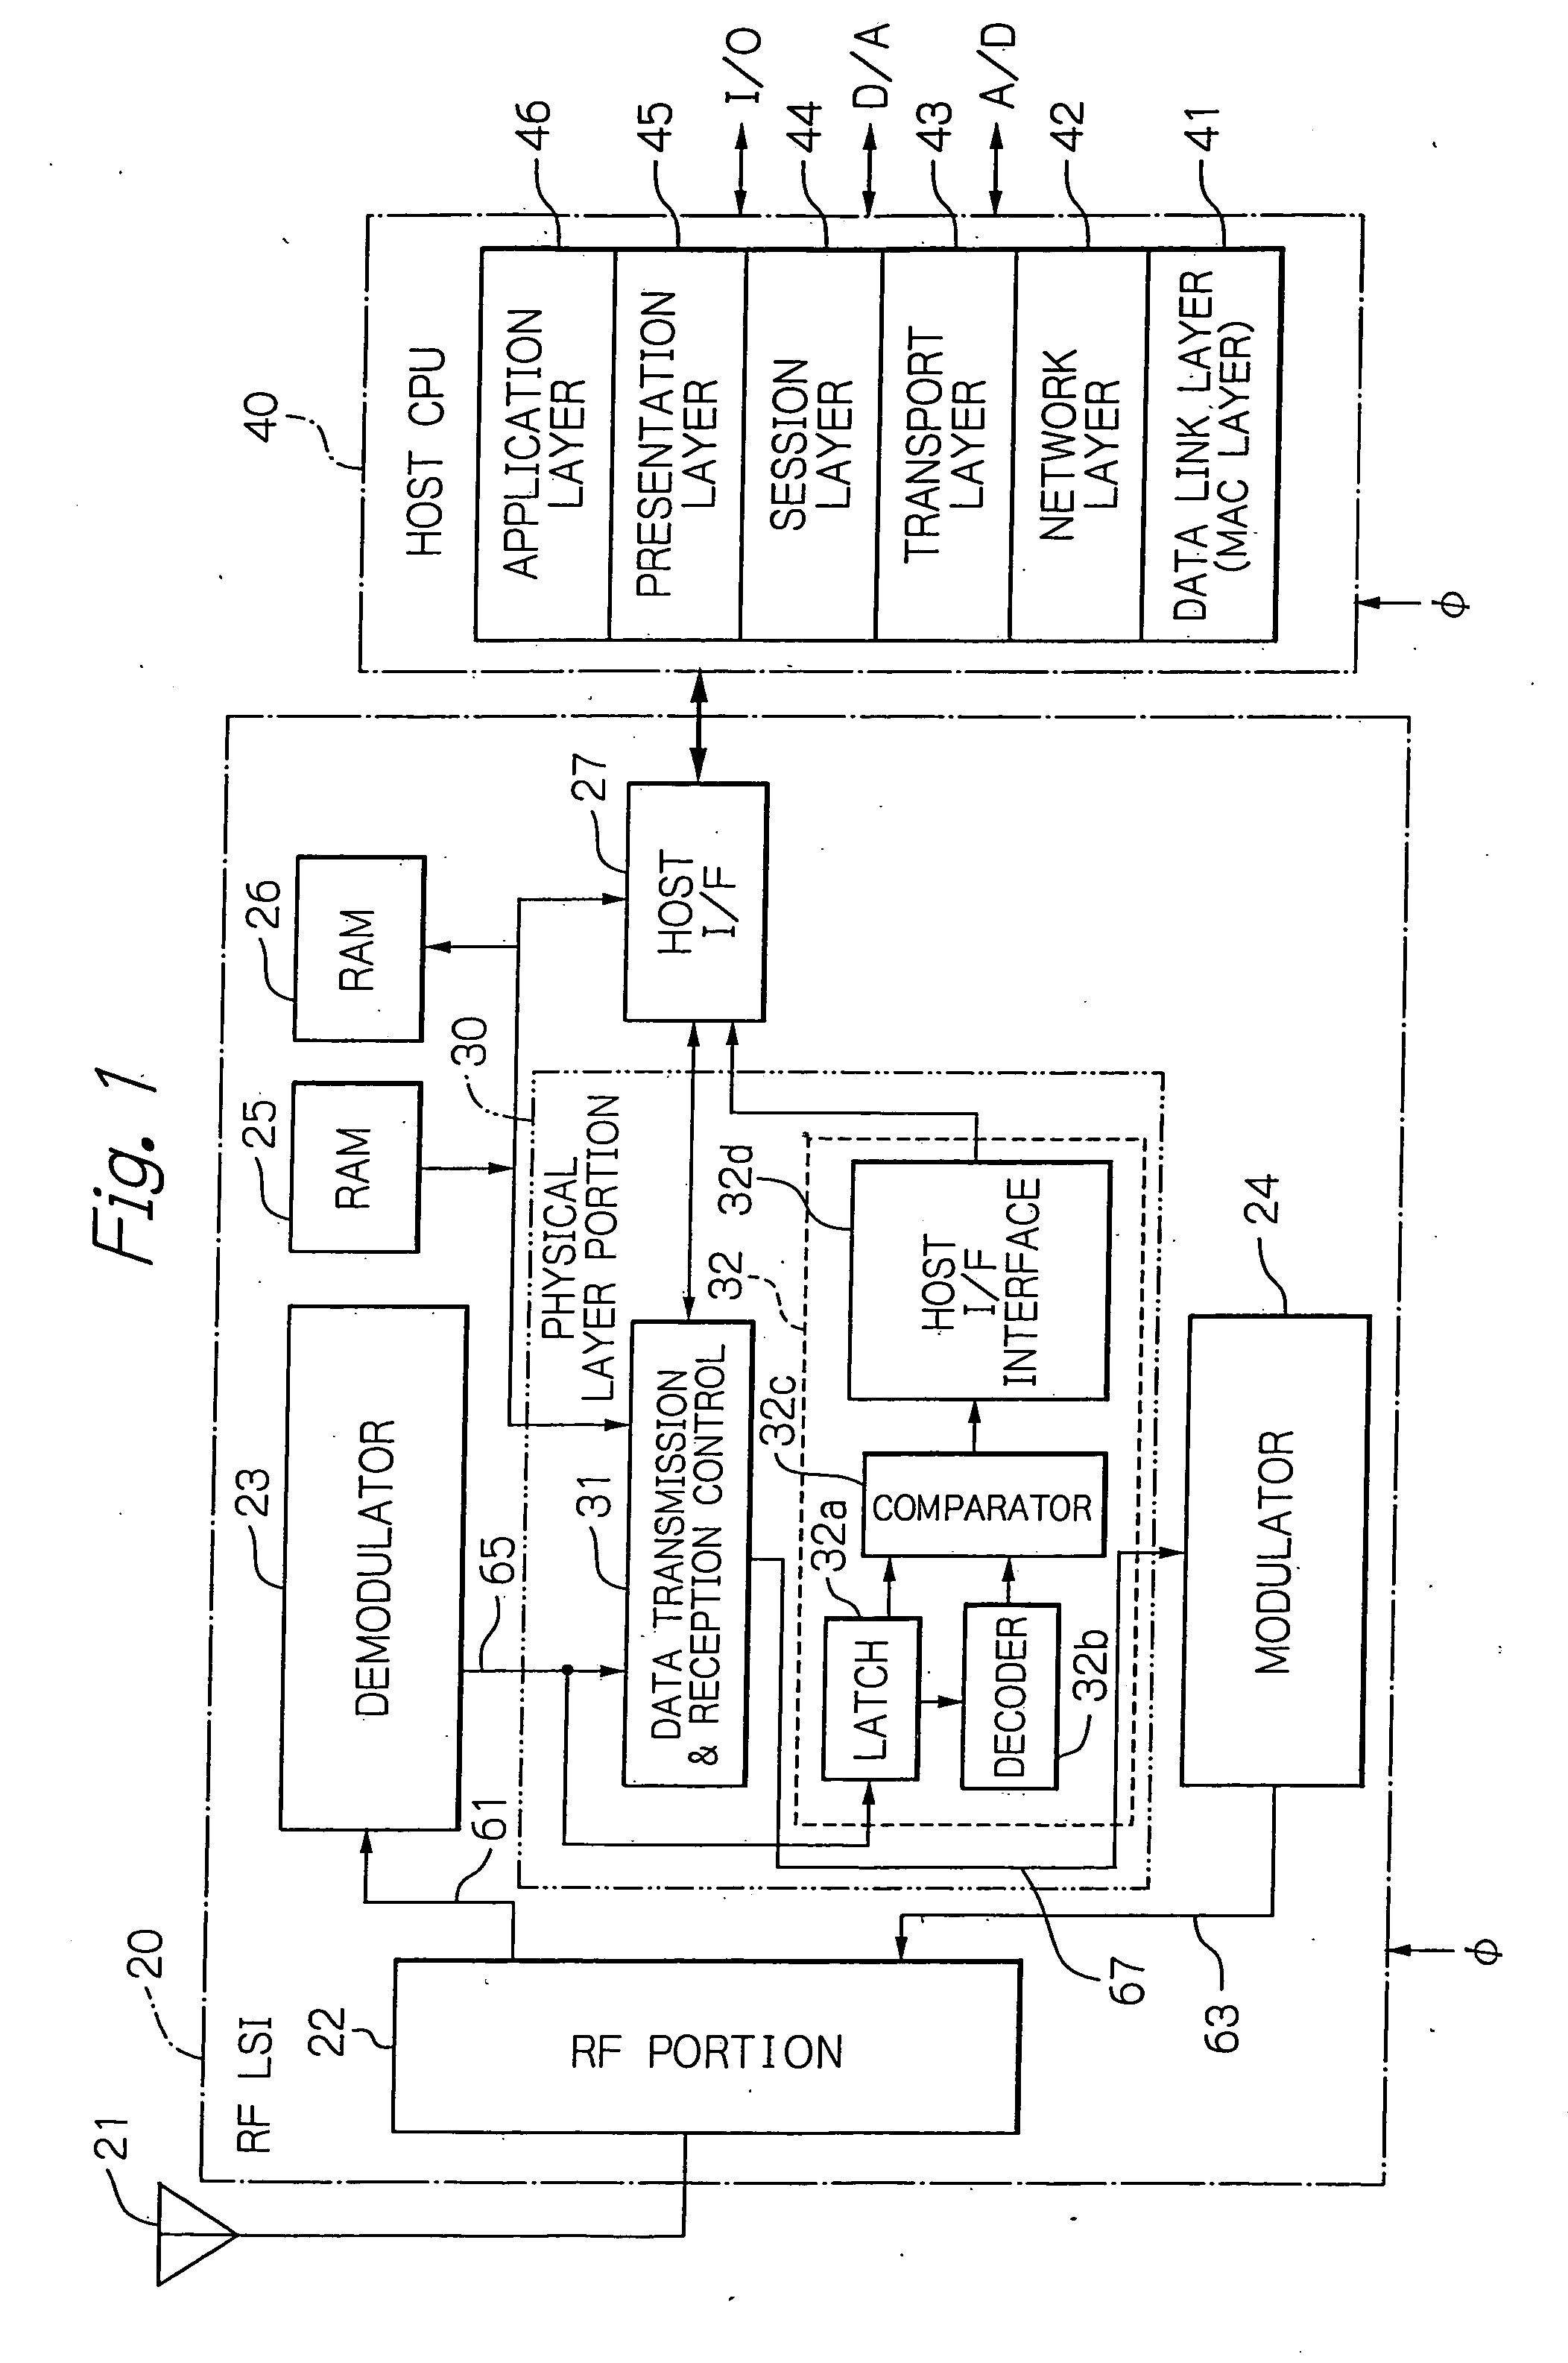 Radio frequency integrated circuit having a physical layer portion integrated therein